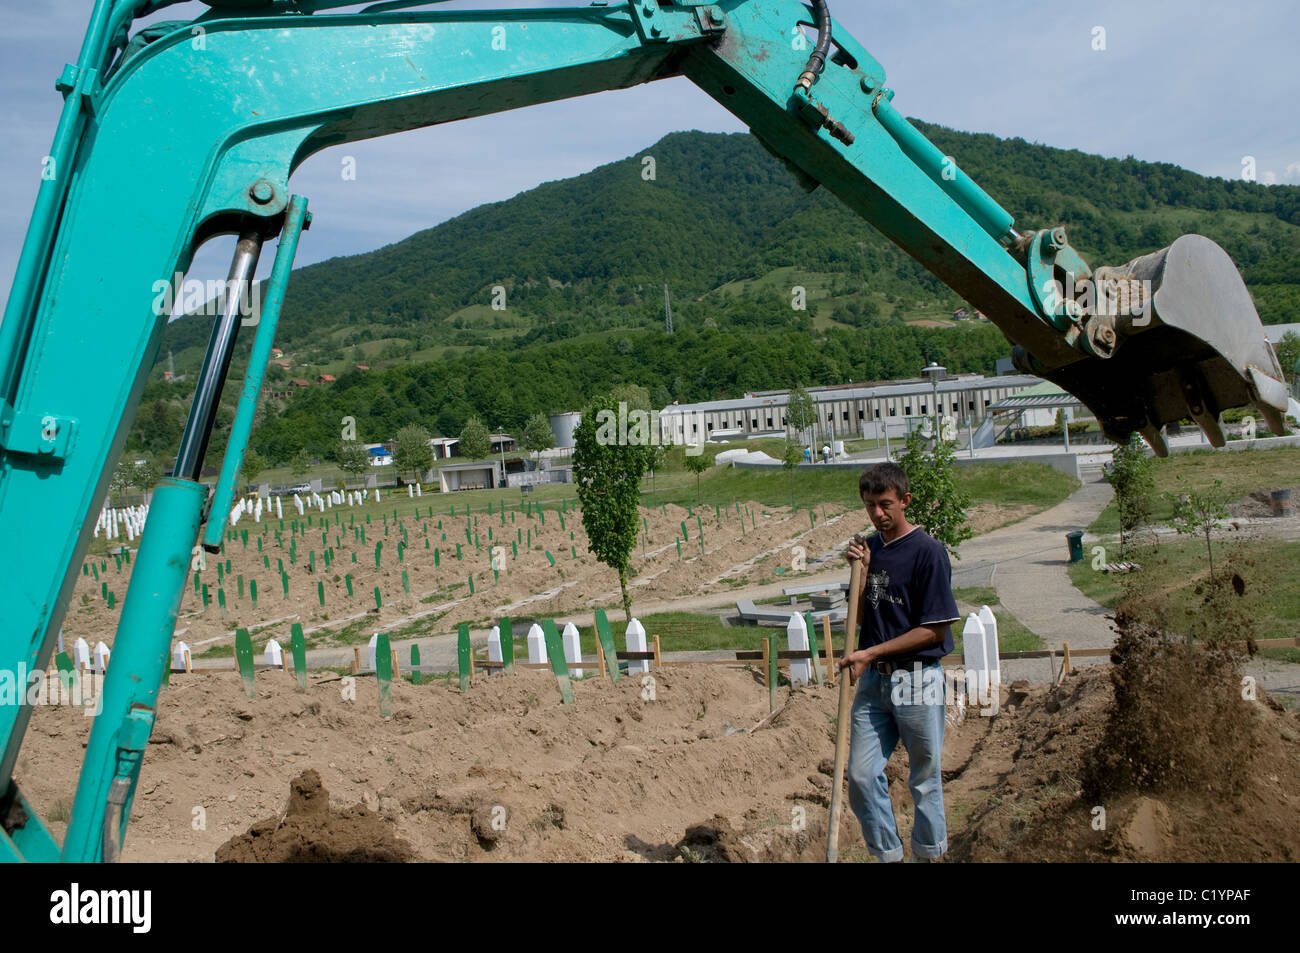 Man digging new graves at Srebrenica Potocari Genocide memorial and cemetery for the victims of the 1995 Genocide in Republika Srpska an entity of Bosnia and Herzegovina. More than 8,000 Bosnian Muslim men and boys were killed after the Bosnian Serb Army attacked Srebrenica, a designated UN safe area, on 10-11 July 1995, despite the presence of UN peacekeepers. Stock Photo